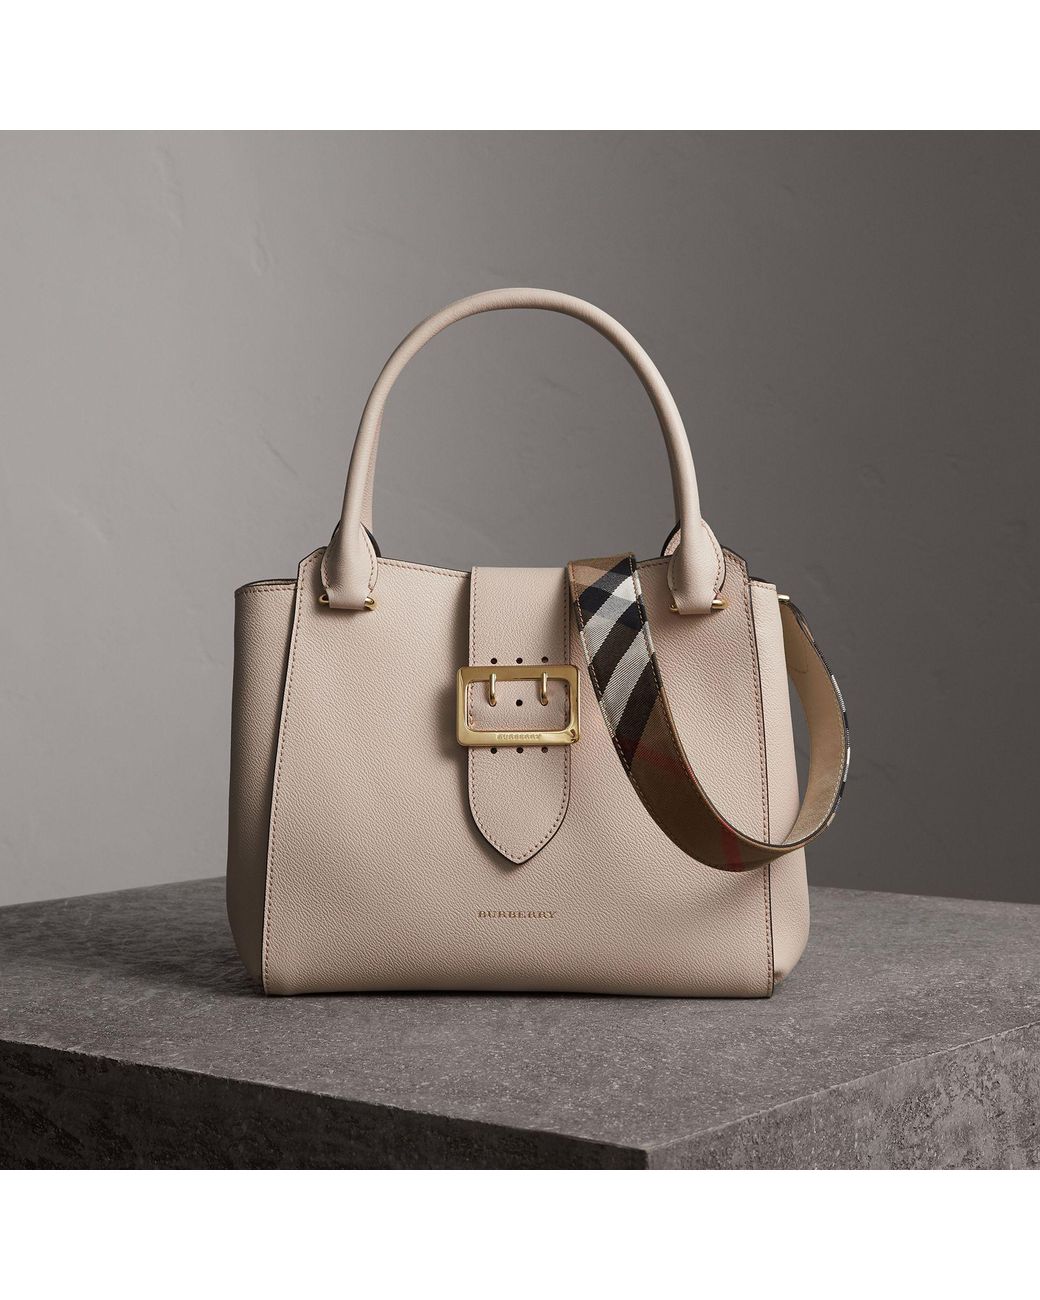 Burberry The Medium Buckle Tote In Grainy Leather Limestone | Lyst Canada